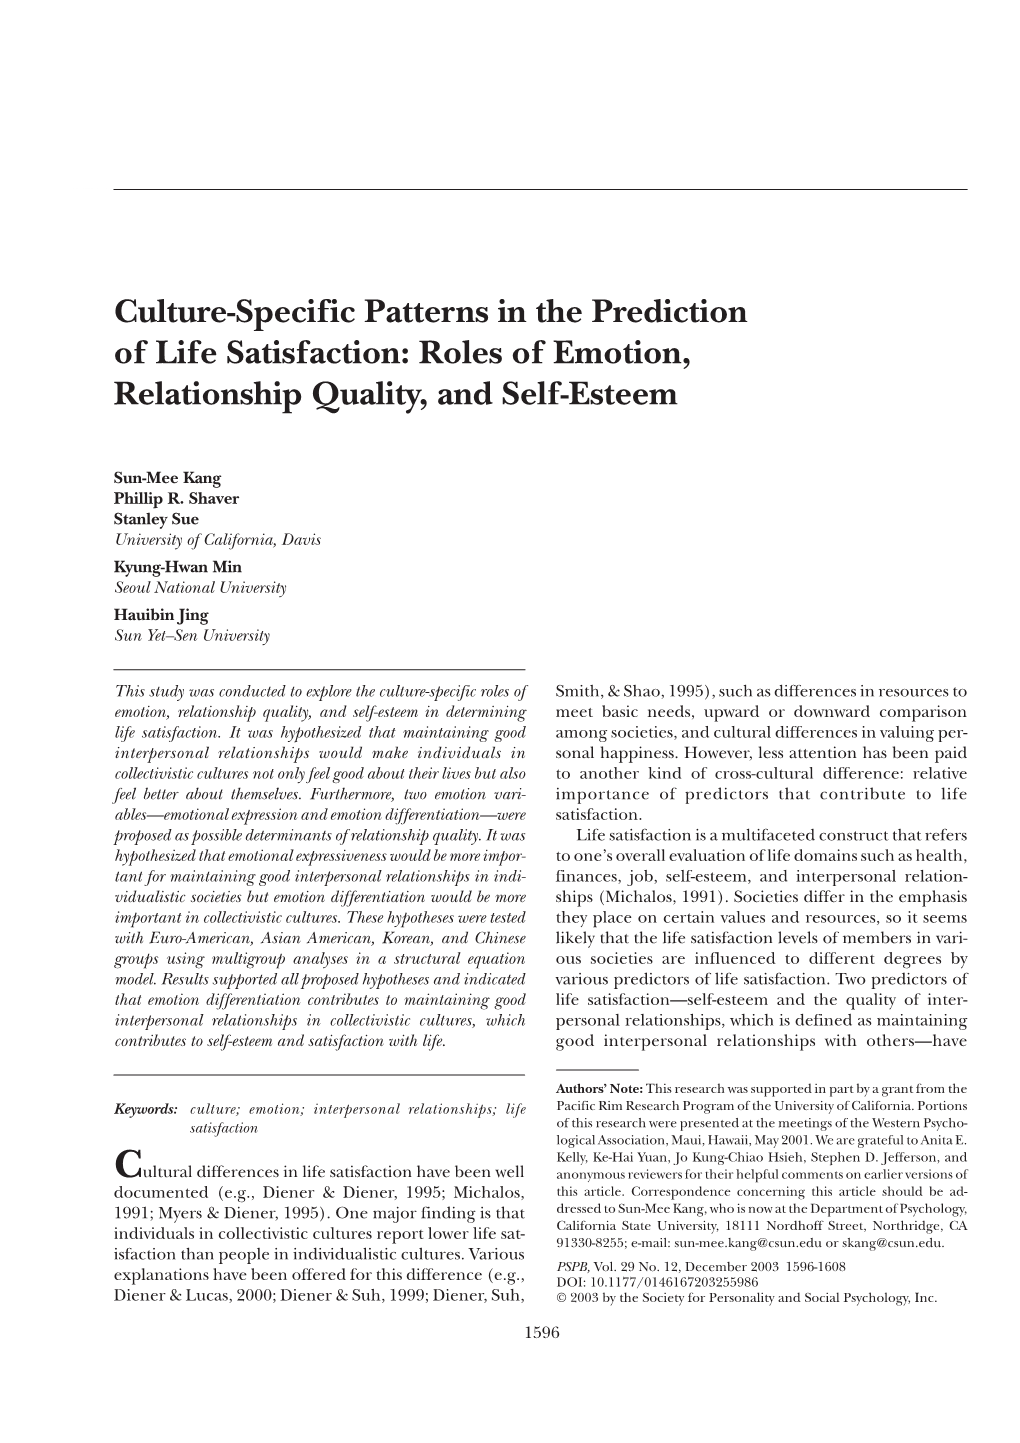 Culture-Specific Patterns in the Prediction of Life Satisfaction: Roles of Emotion, Relationship Quality, and Self-Esteem